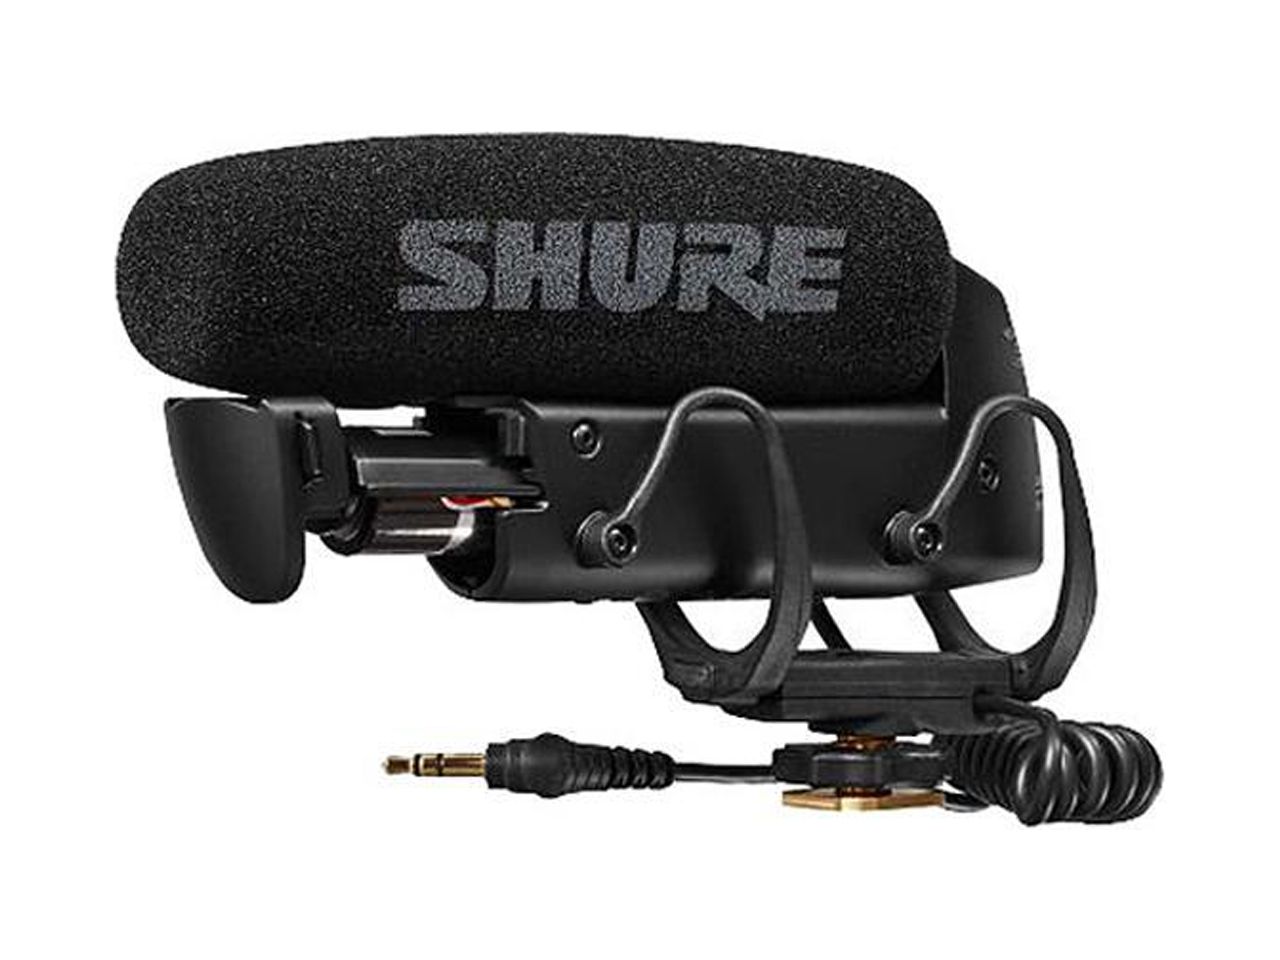 Shure VP83 LensHopper Camera-Mounted Condenser Microphone for Use with DSLR Cameras and HD Camcorders - image 4 of 14